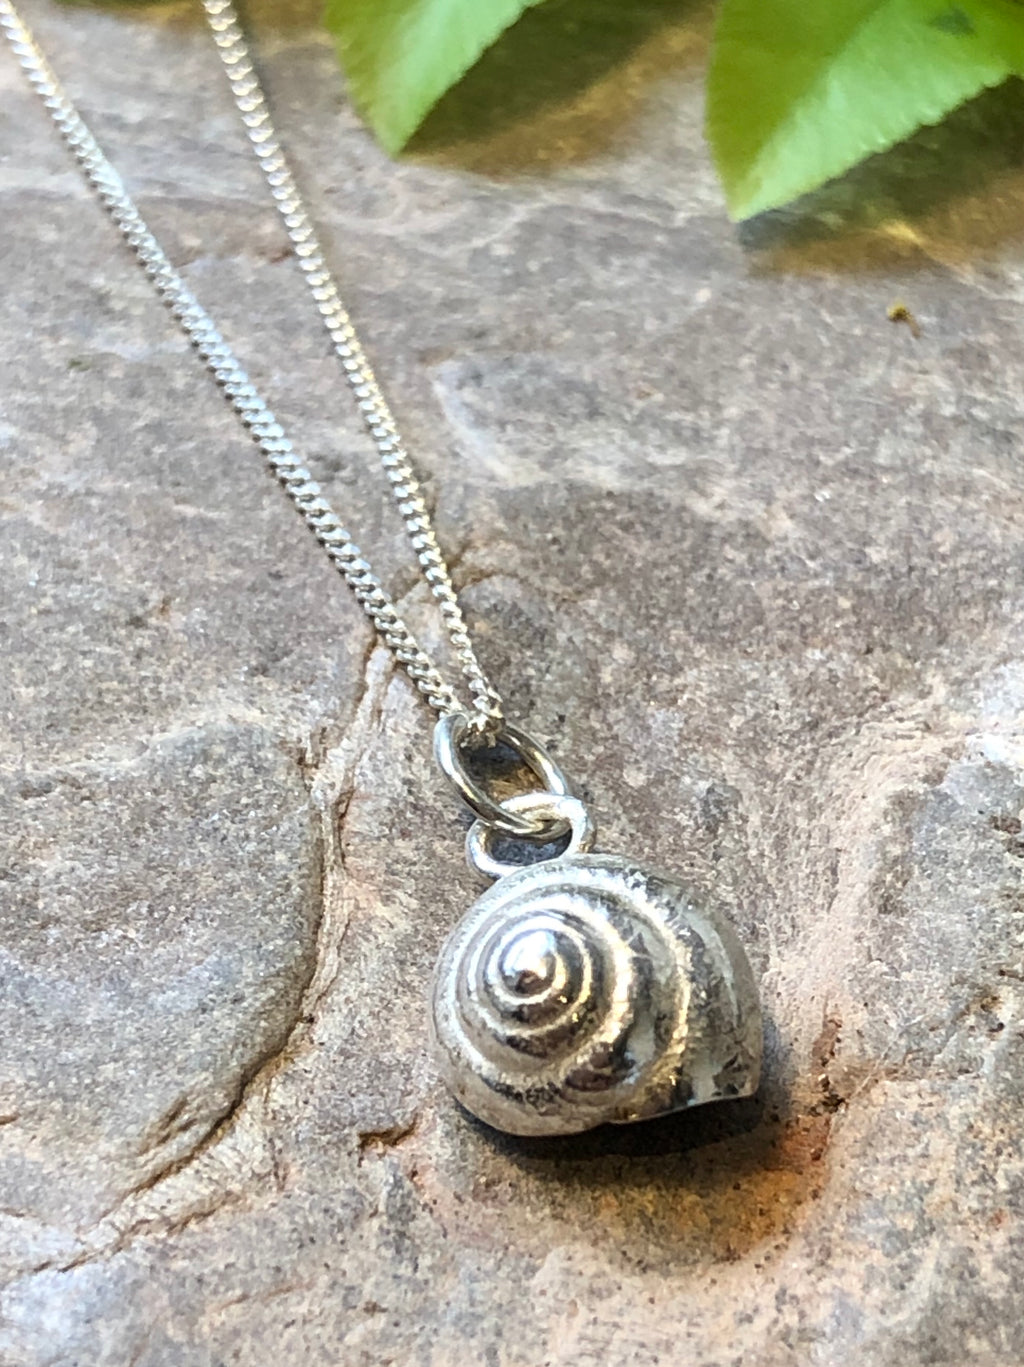 Spiral shell necklace.